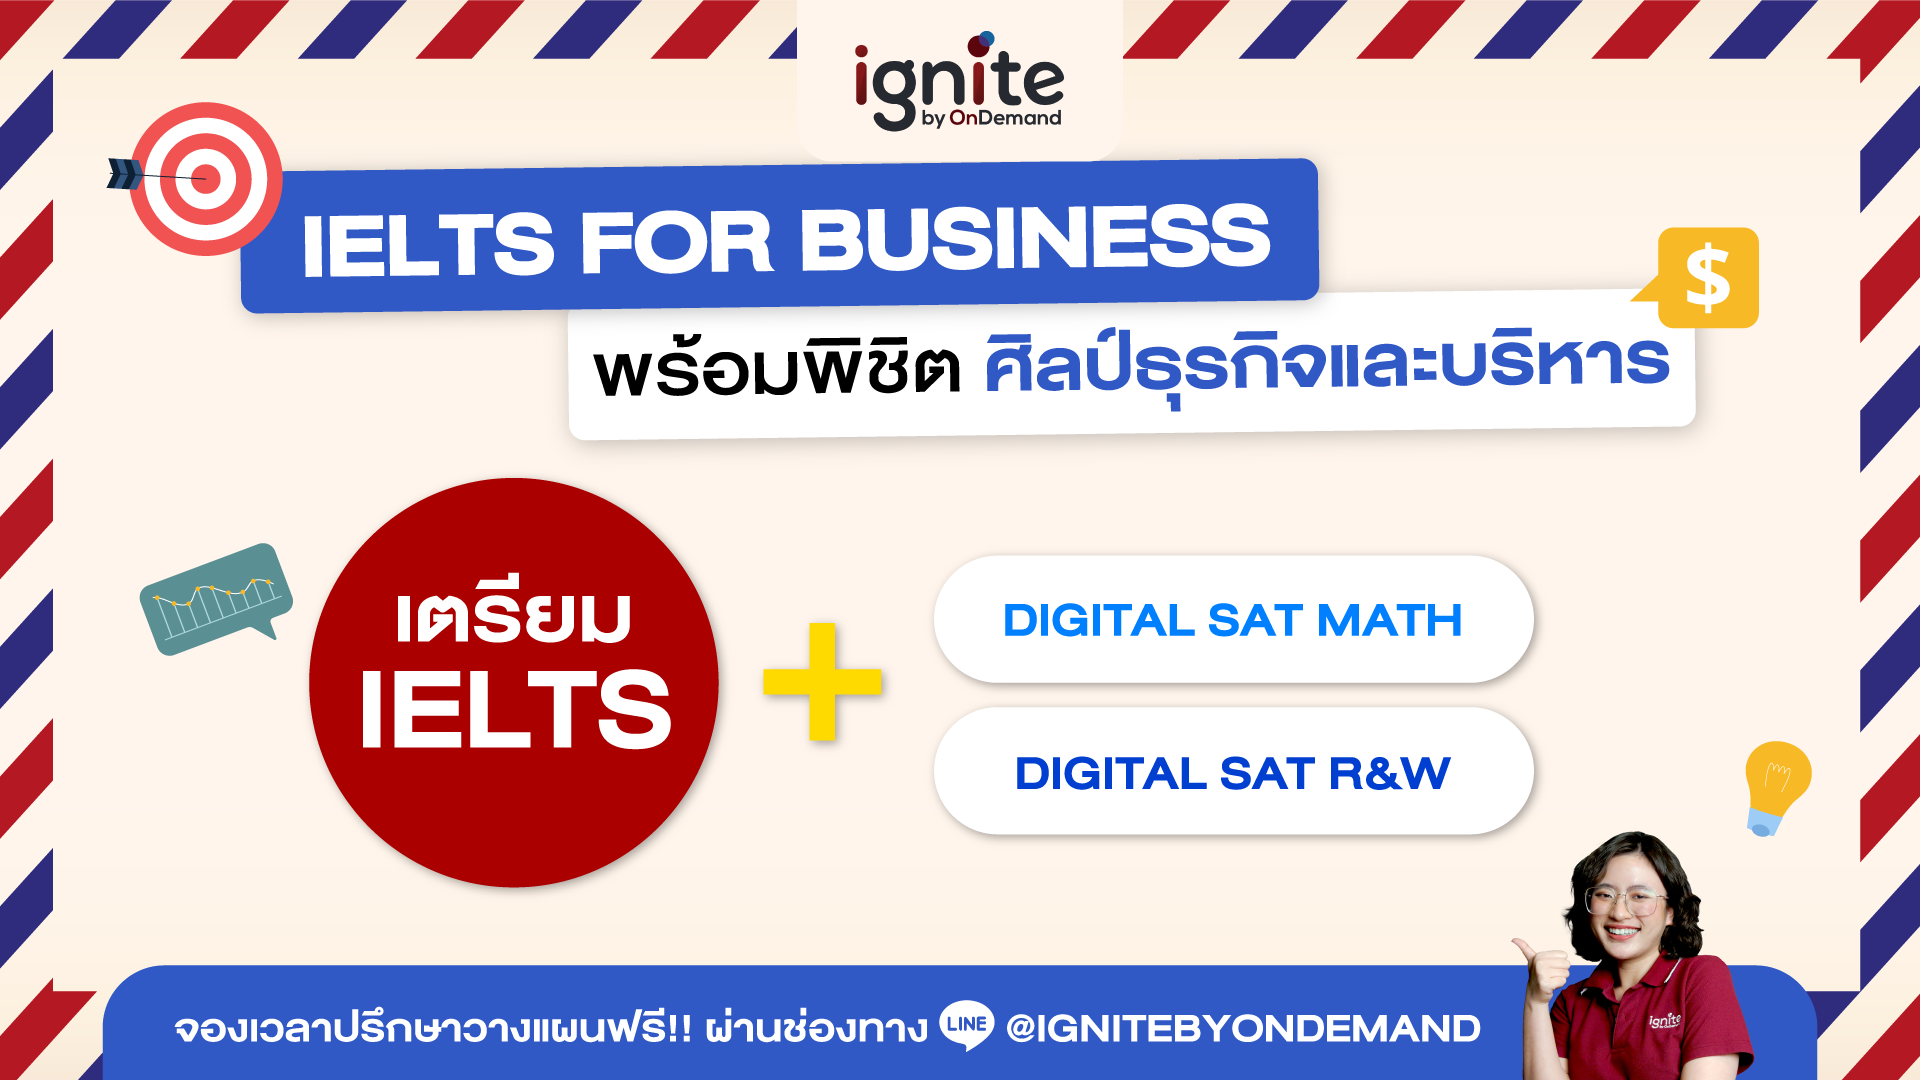 ielts for business - ignite by ondemand